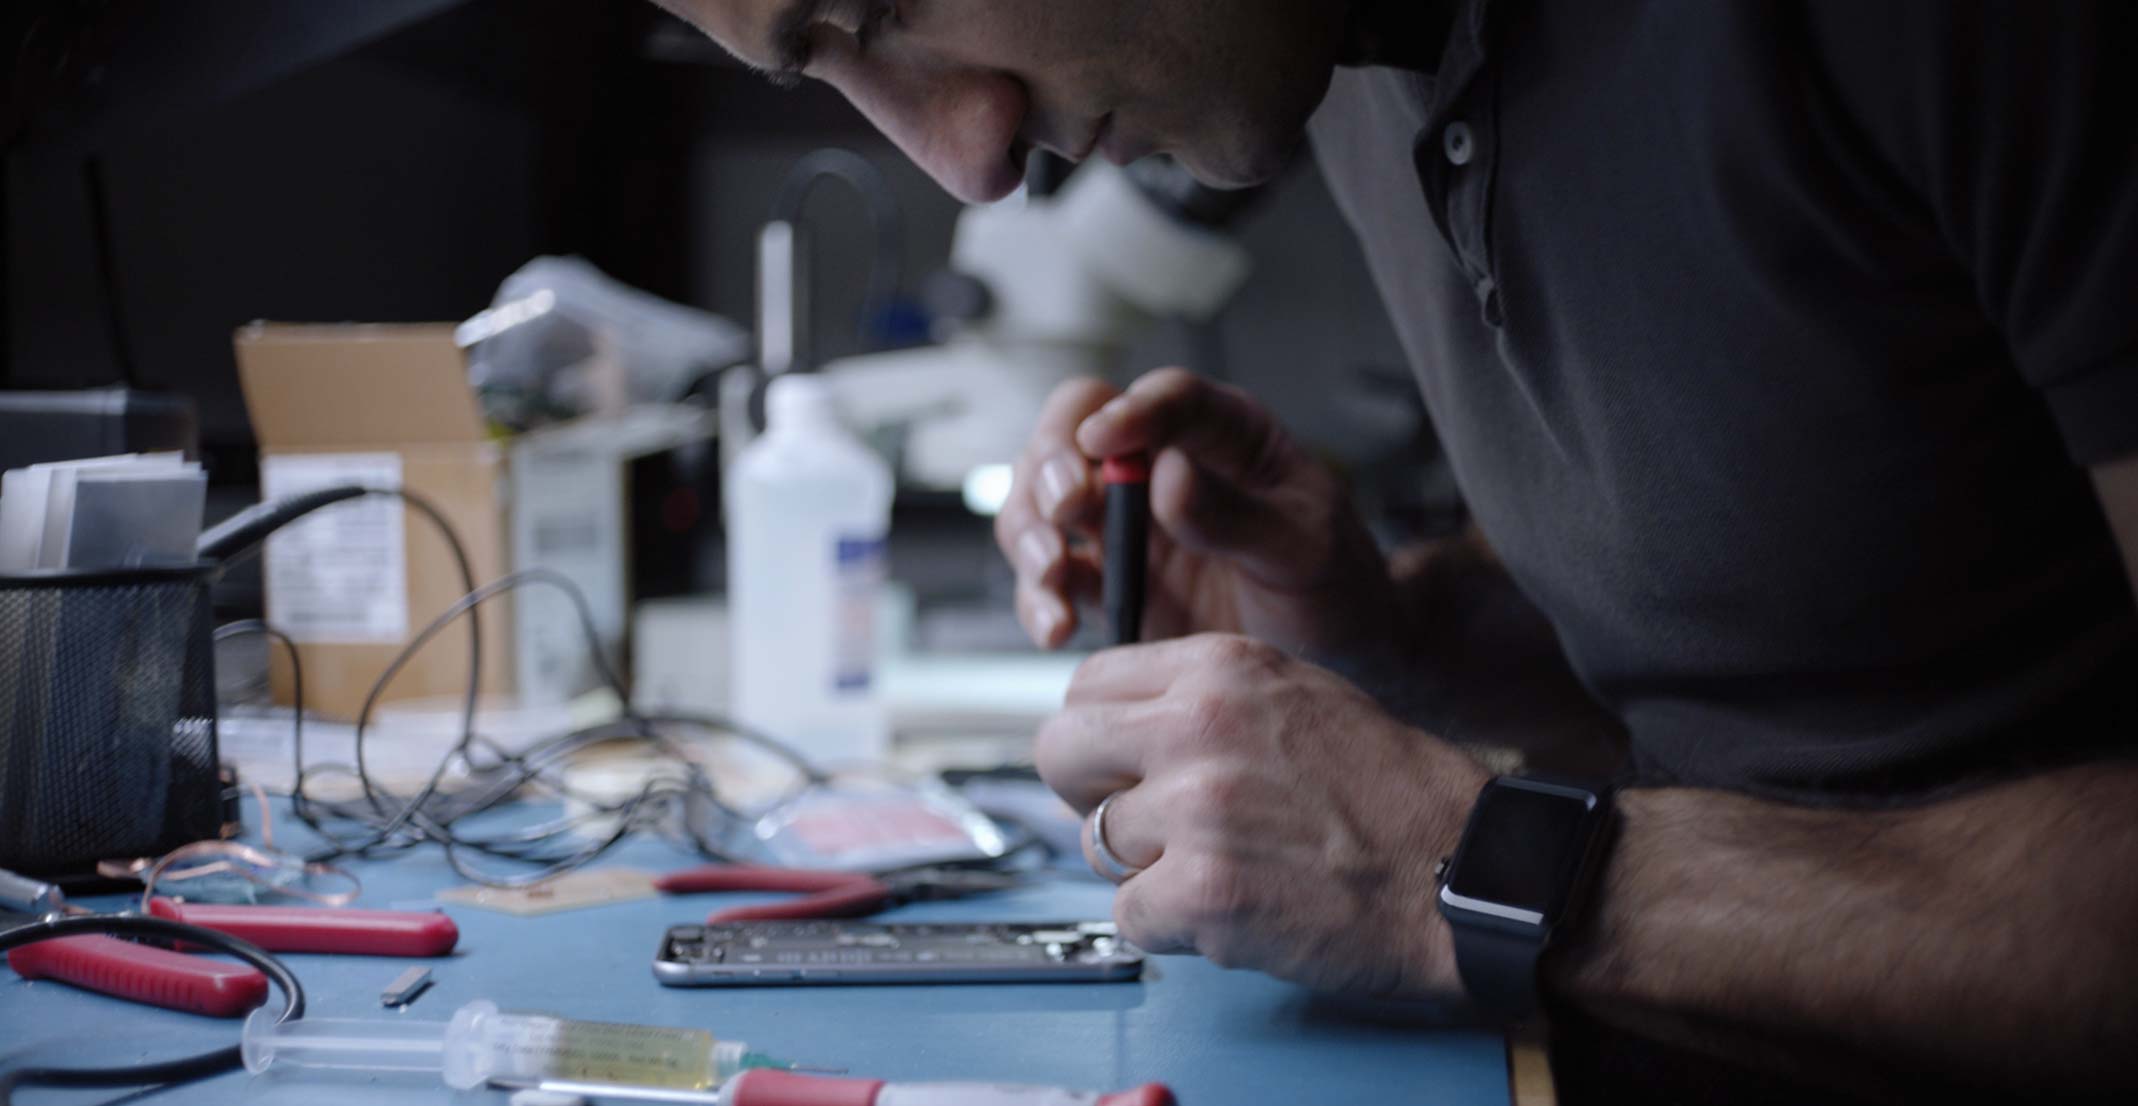 Ehsan, an engineering manager for Apple’s Sensing Product Design group, works on an iPhone in an engineering lab.